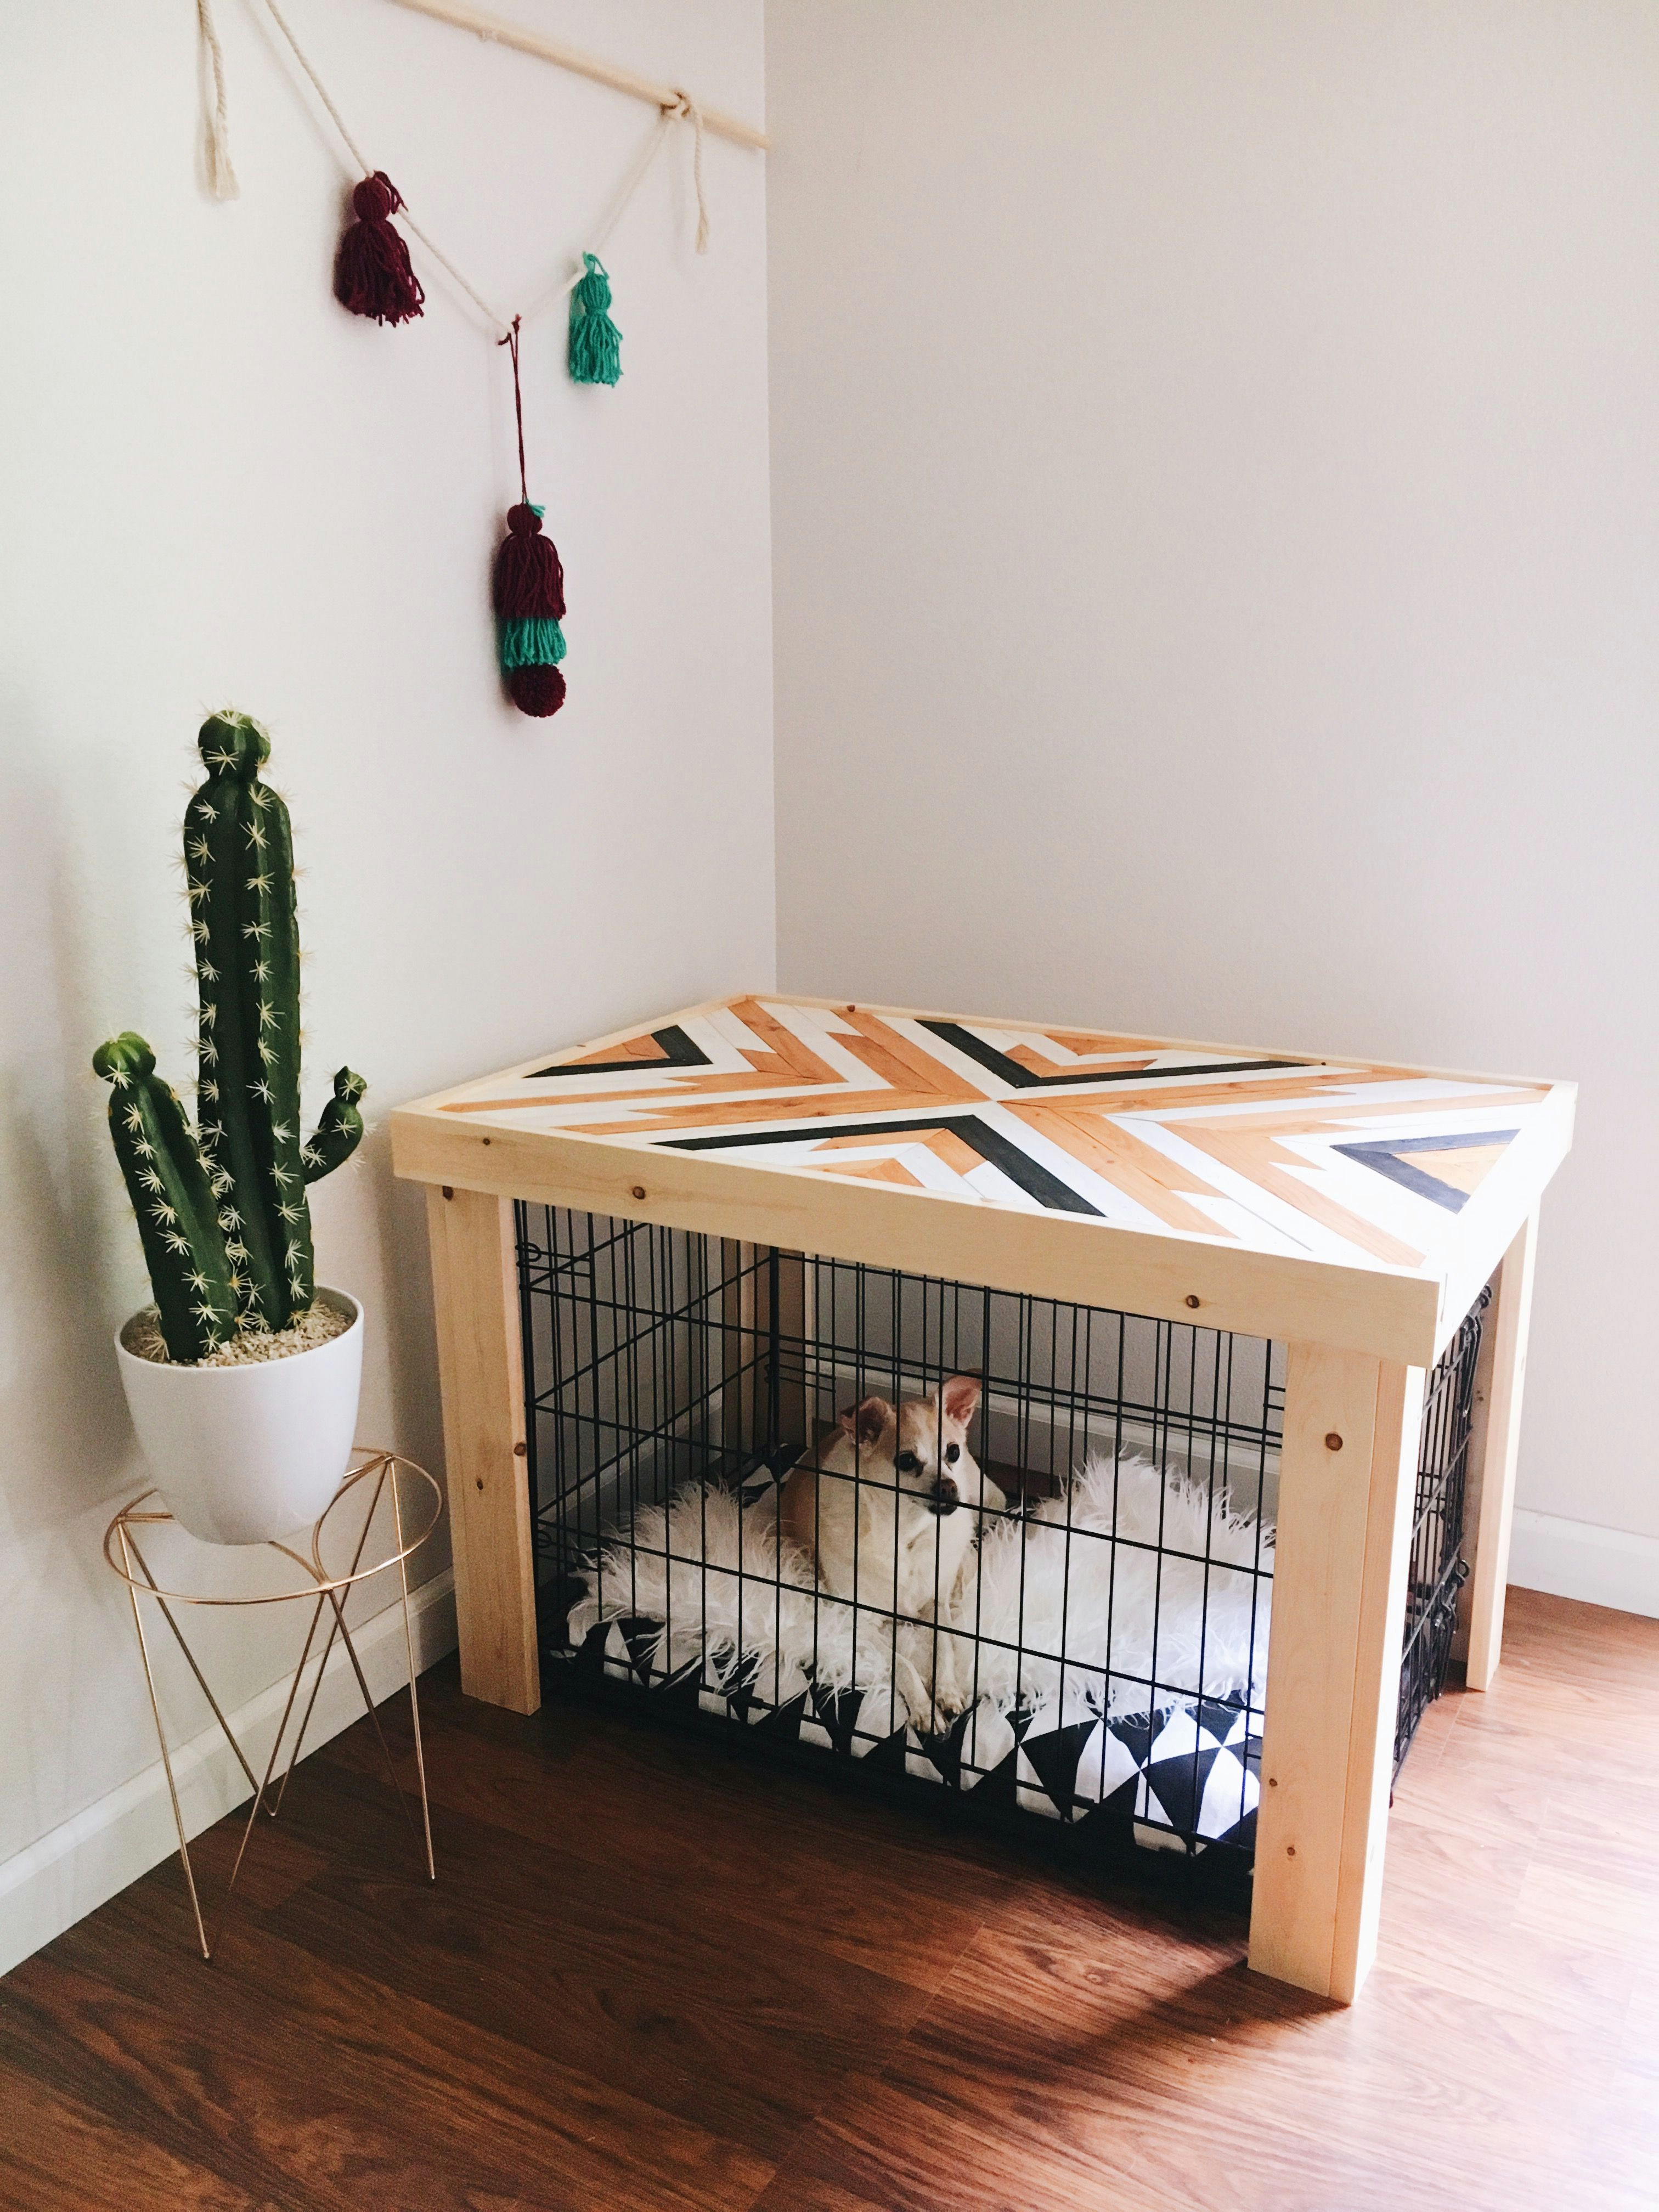 transform your basic wire dog kennel into a work of art with a crate